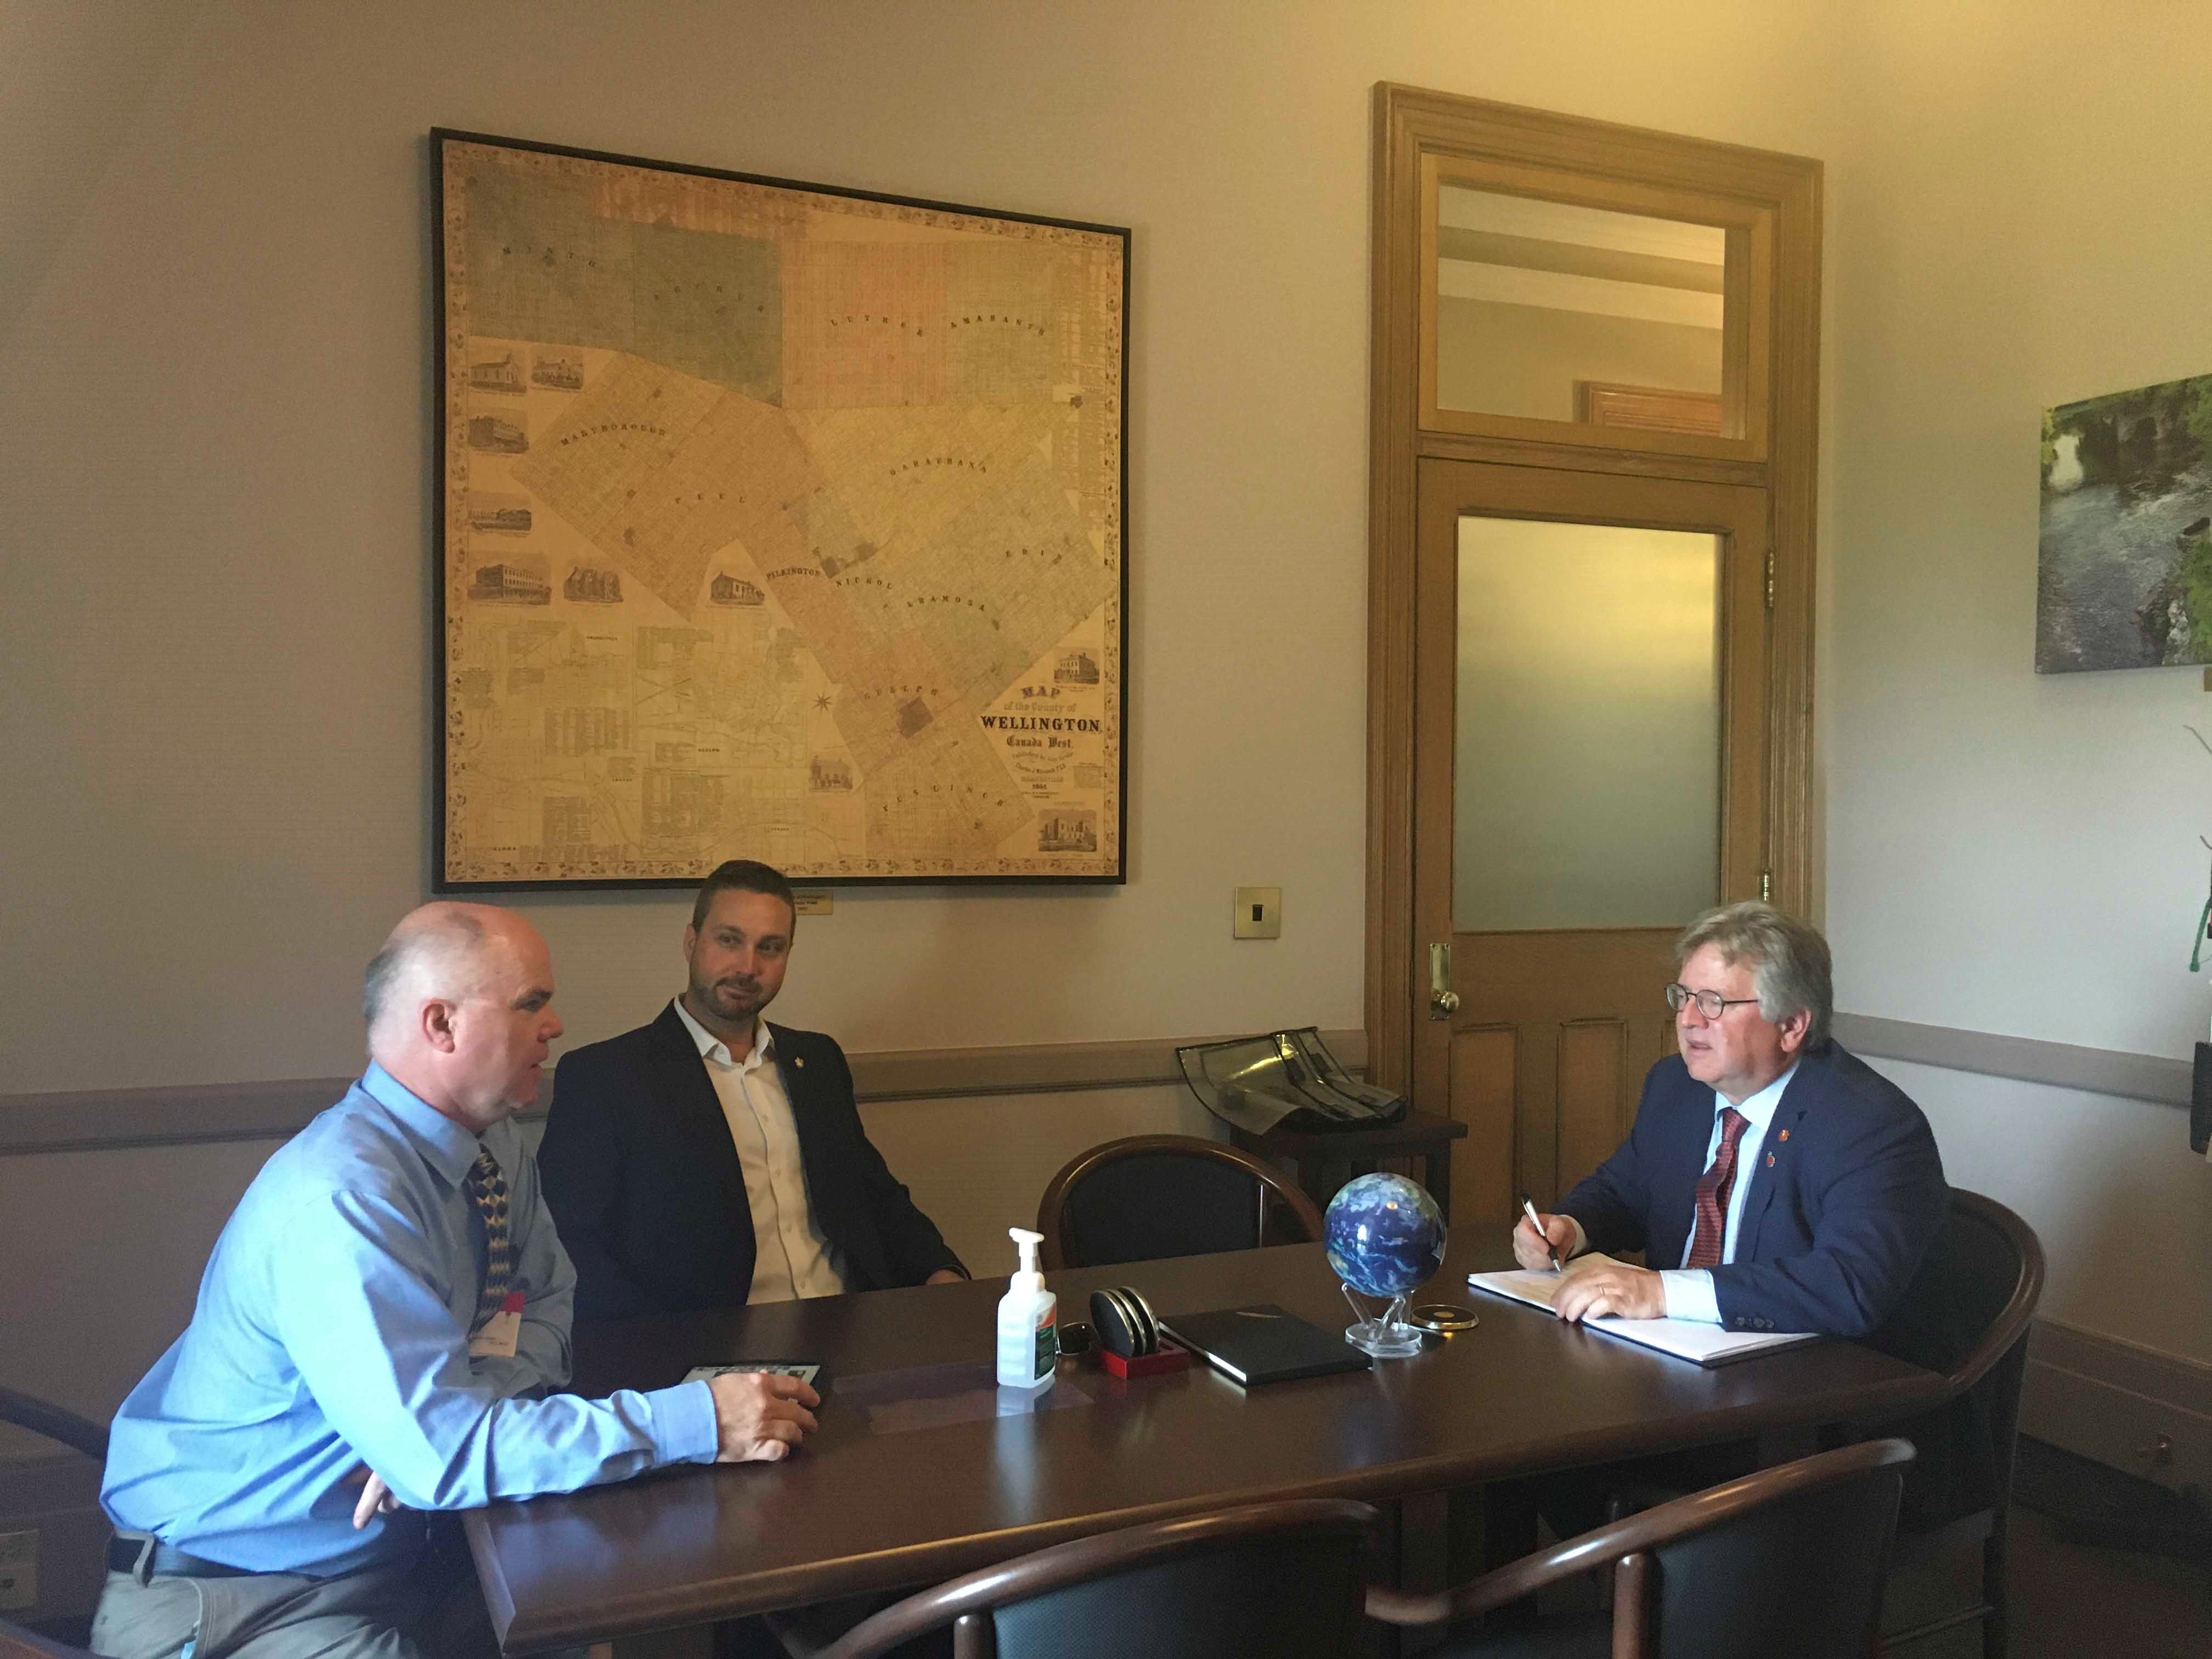 Tuesday, May 31, 2022 – Senator Rob Black (right) meets with Branden Leslie and Jason Saunders of the Grain Growers of Canada to discuss issues facing the grain industry. The senator also learned more about the organization’s work on soil health and Mr. Saunders’s efforts to collect data on soil organic matter.